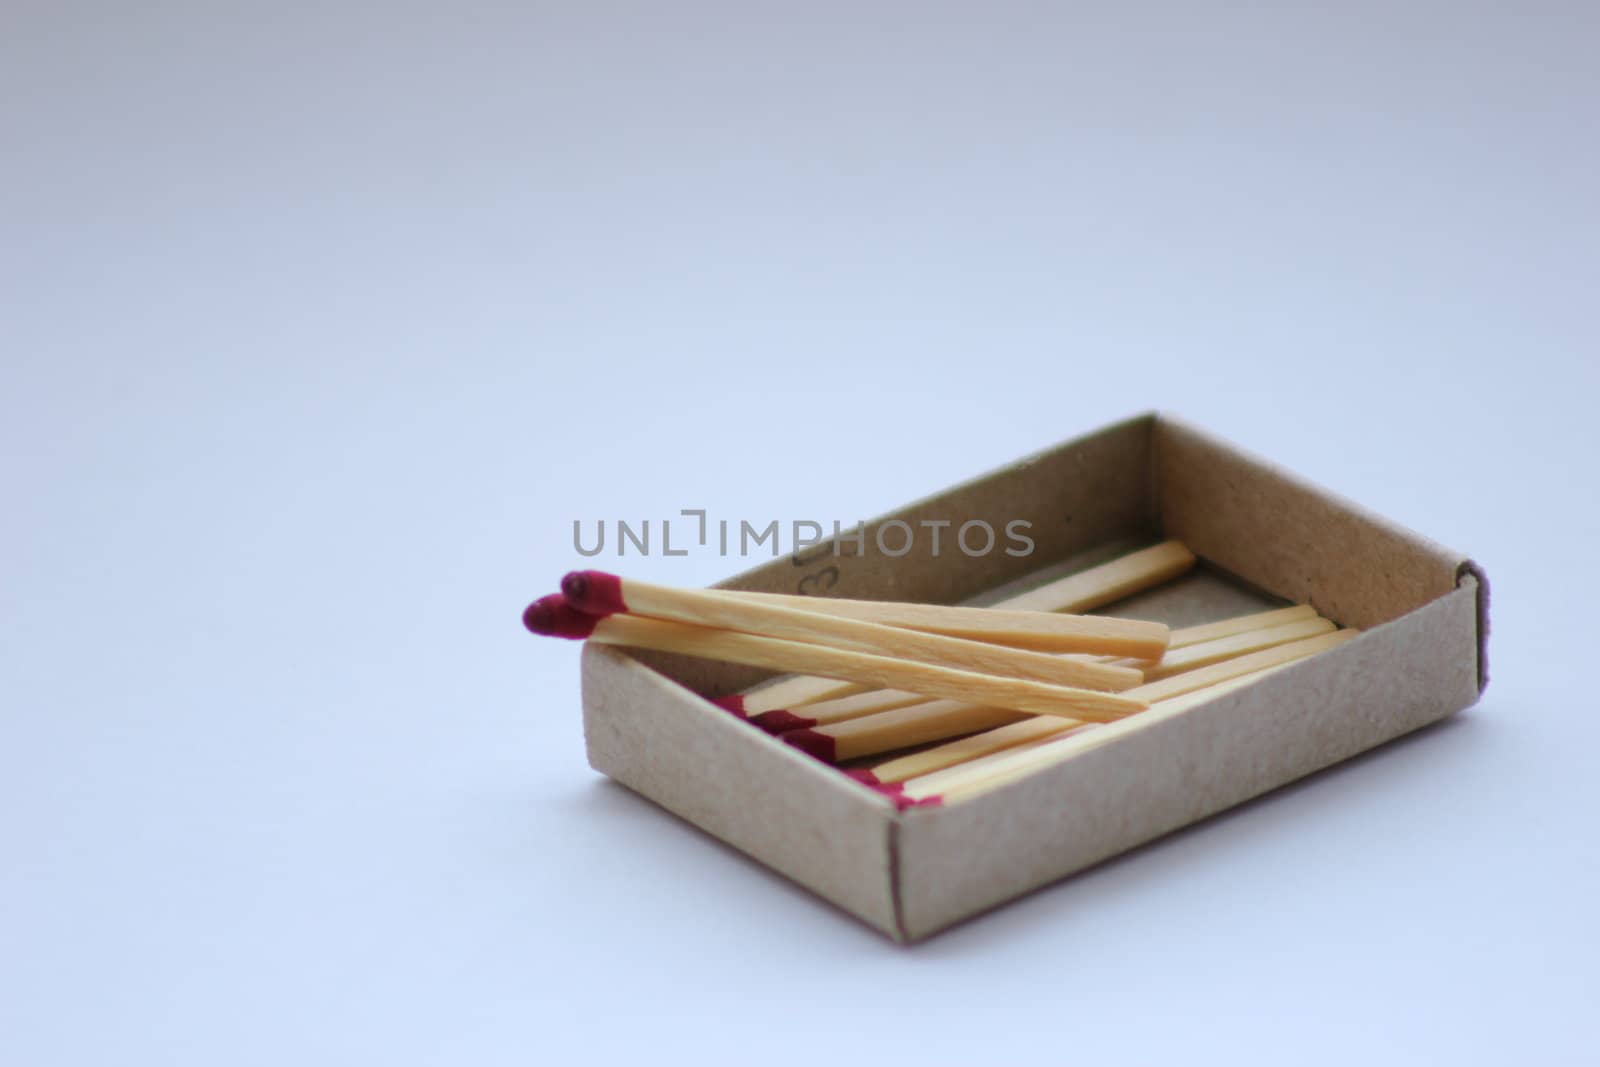 Unburned Matches by abhbah05